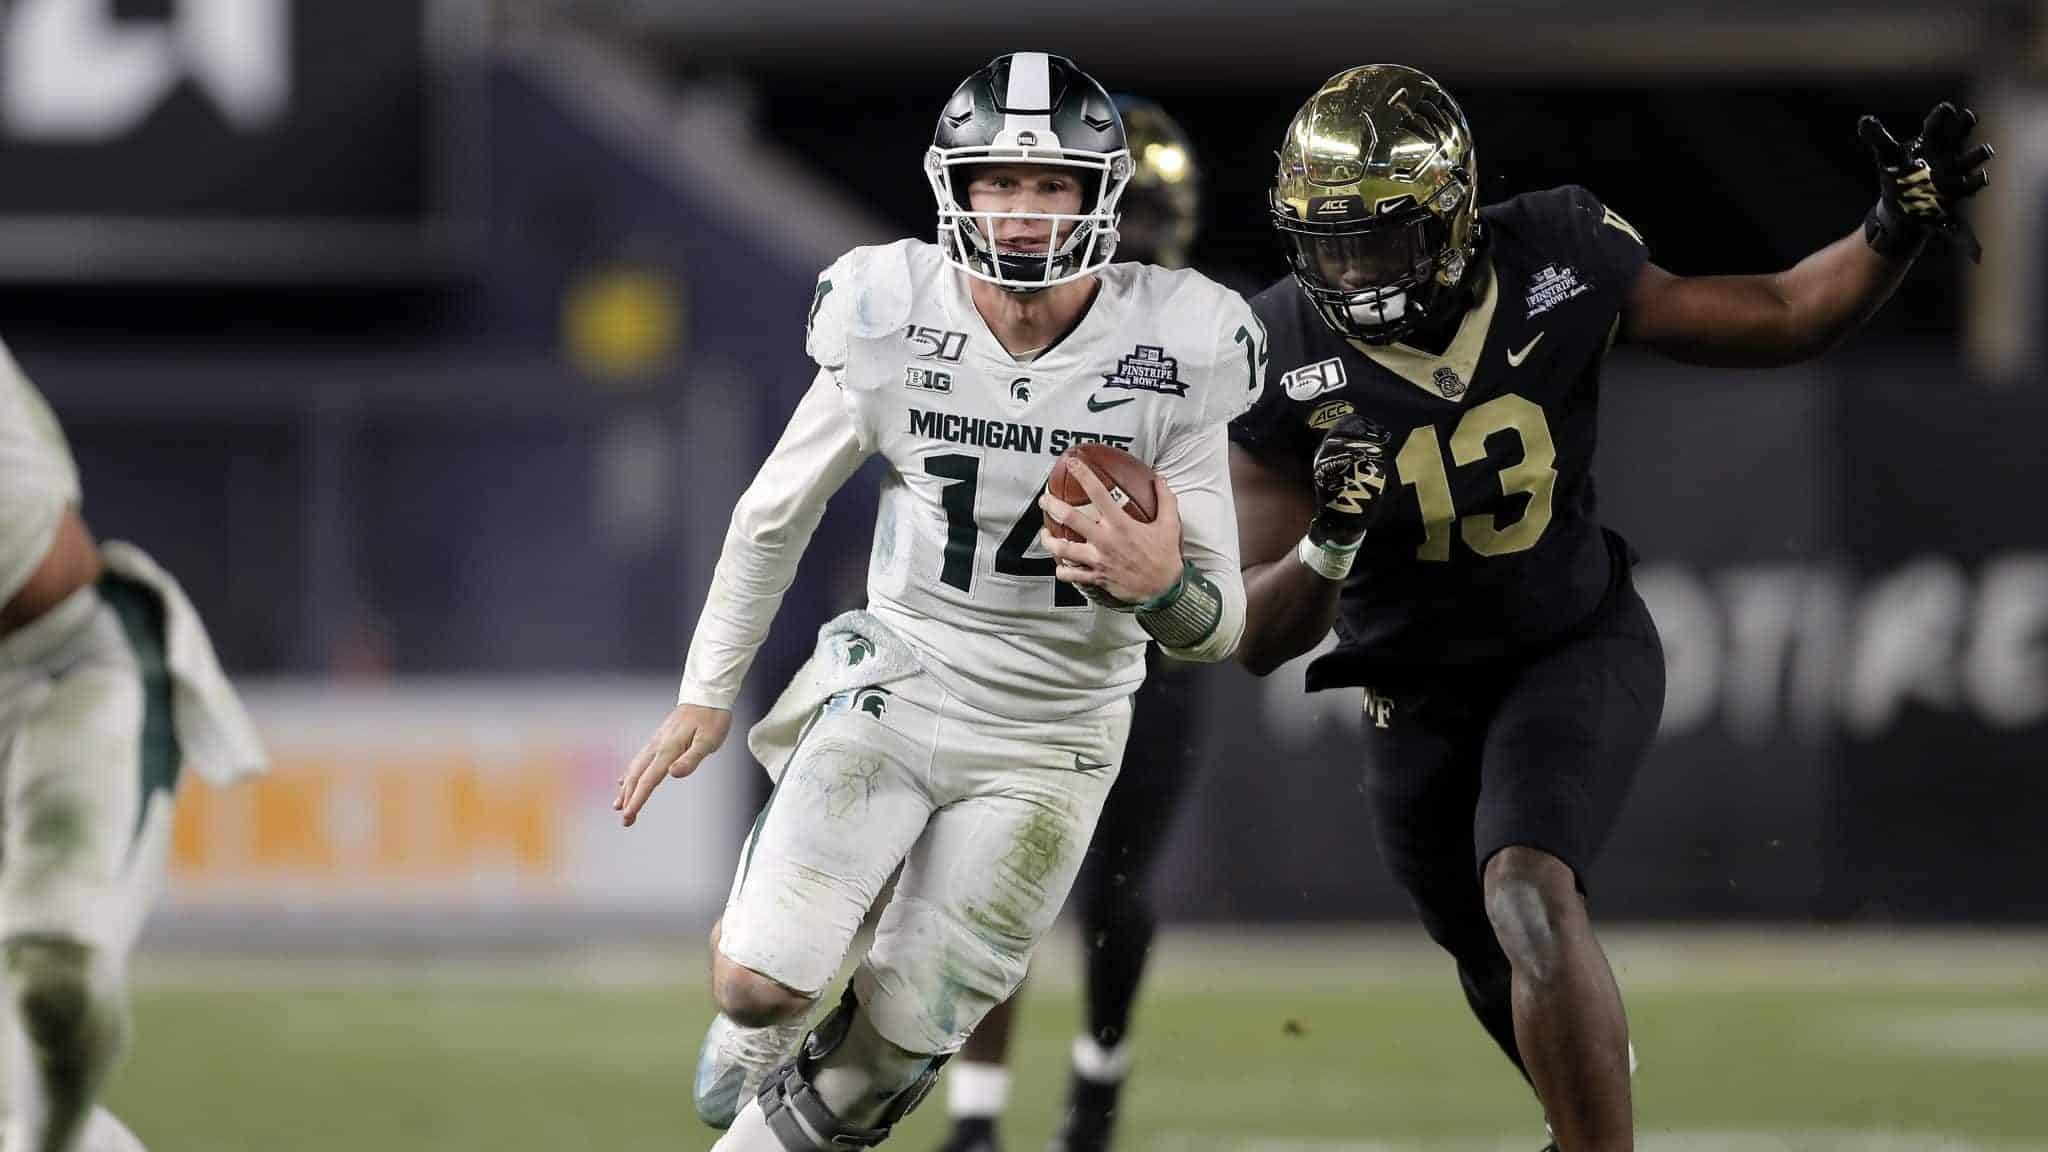 NEW YORK, NY - DECEMBER 27: Quarterback Brian Lewerke #14 of the Michigan State Spartans rushes past defensive lineman Manny Walker #13 of the Wake Forest Demon Deacons during the second half of the New Era Pinstripe Bowl at Yankee Stadium on December 27, 2019 in the Bronx borough of New York City. Michigan State Spartans won 27-21.